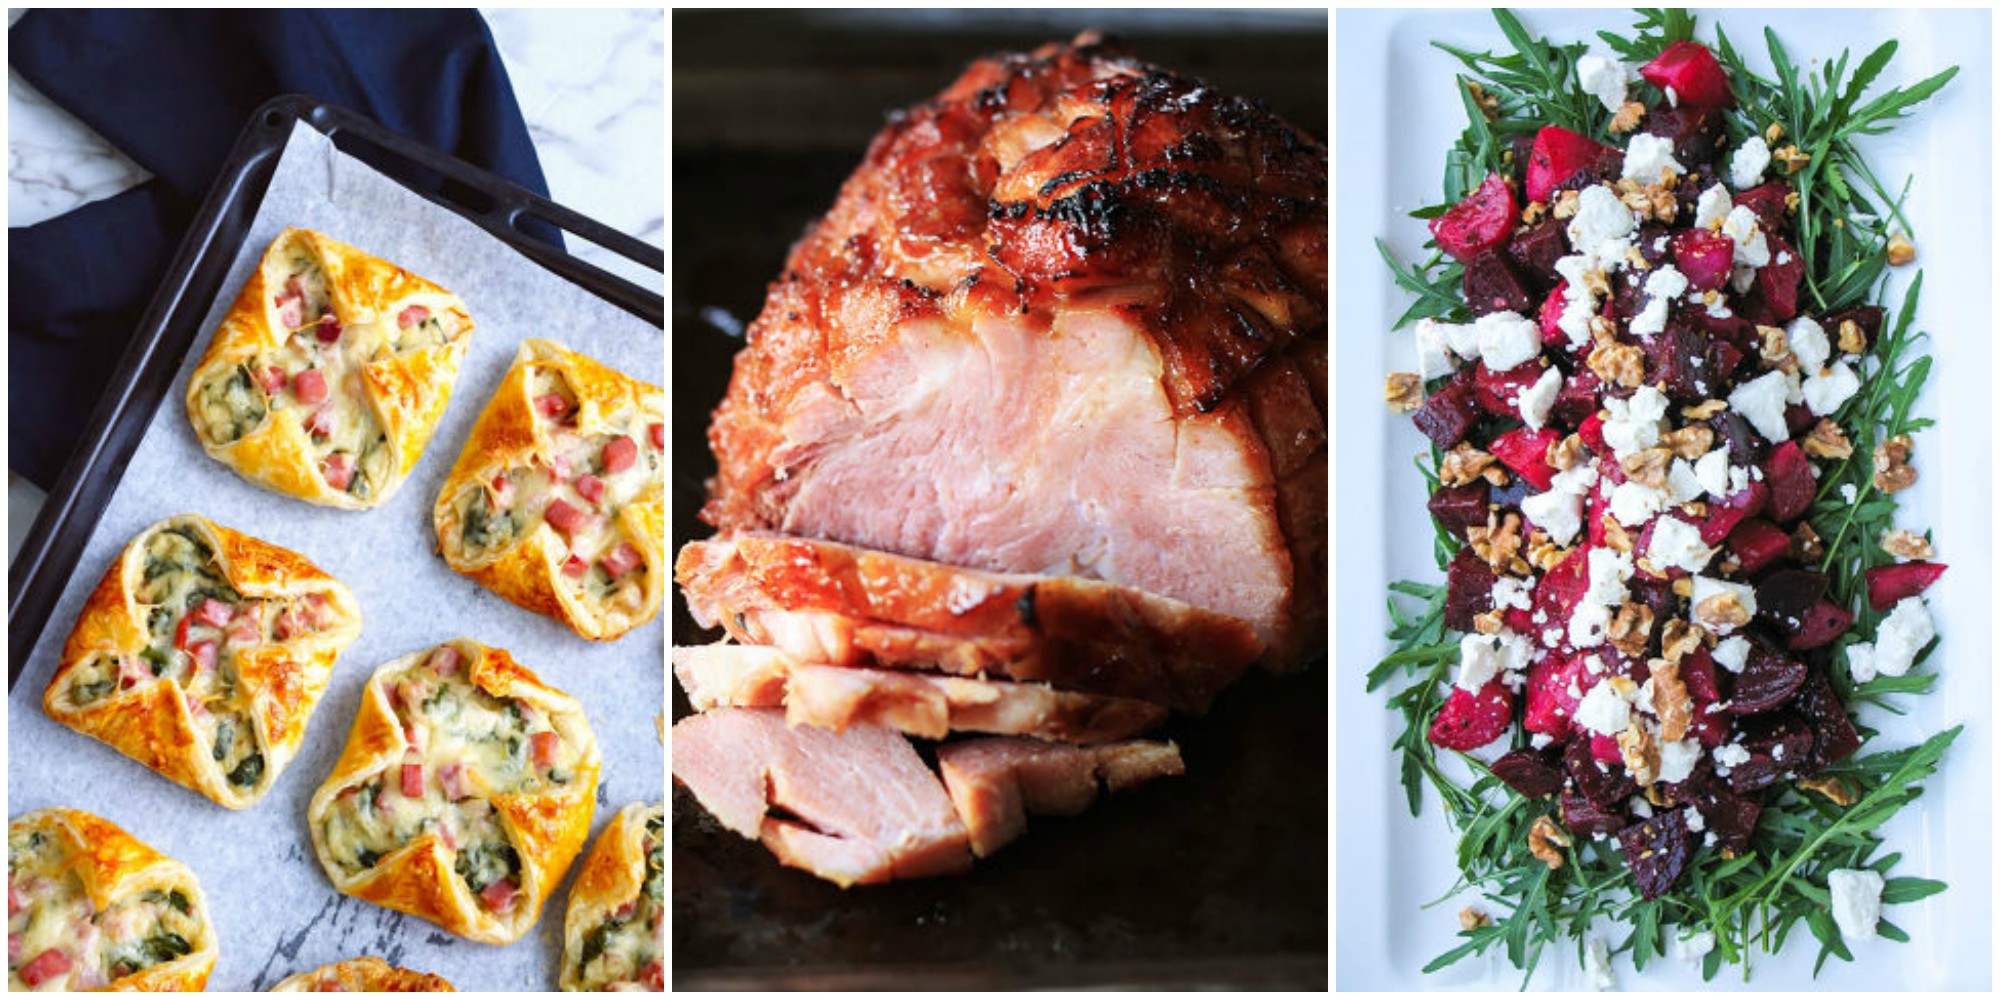 25 Christmas Lunch Recipes - Best Holiday Lunch Ideas